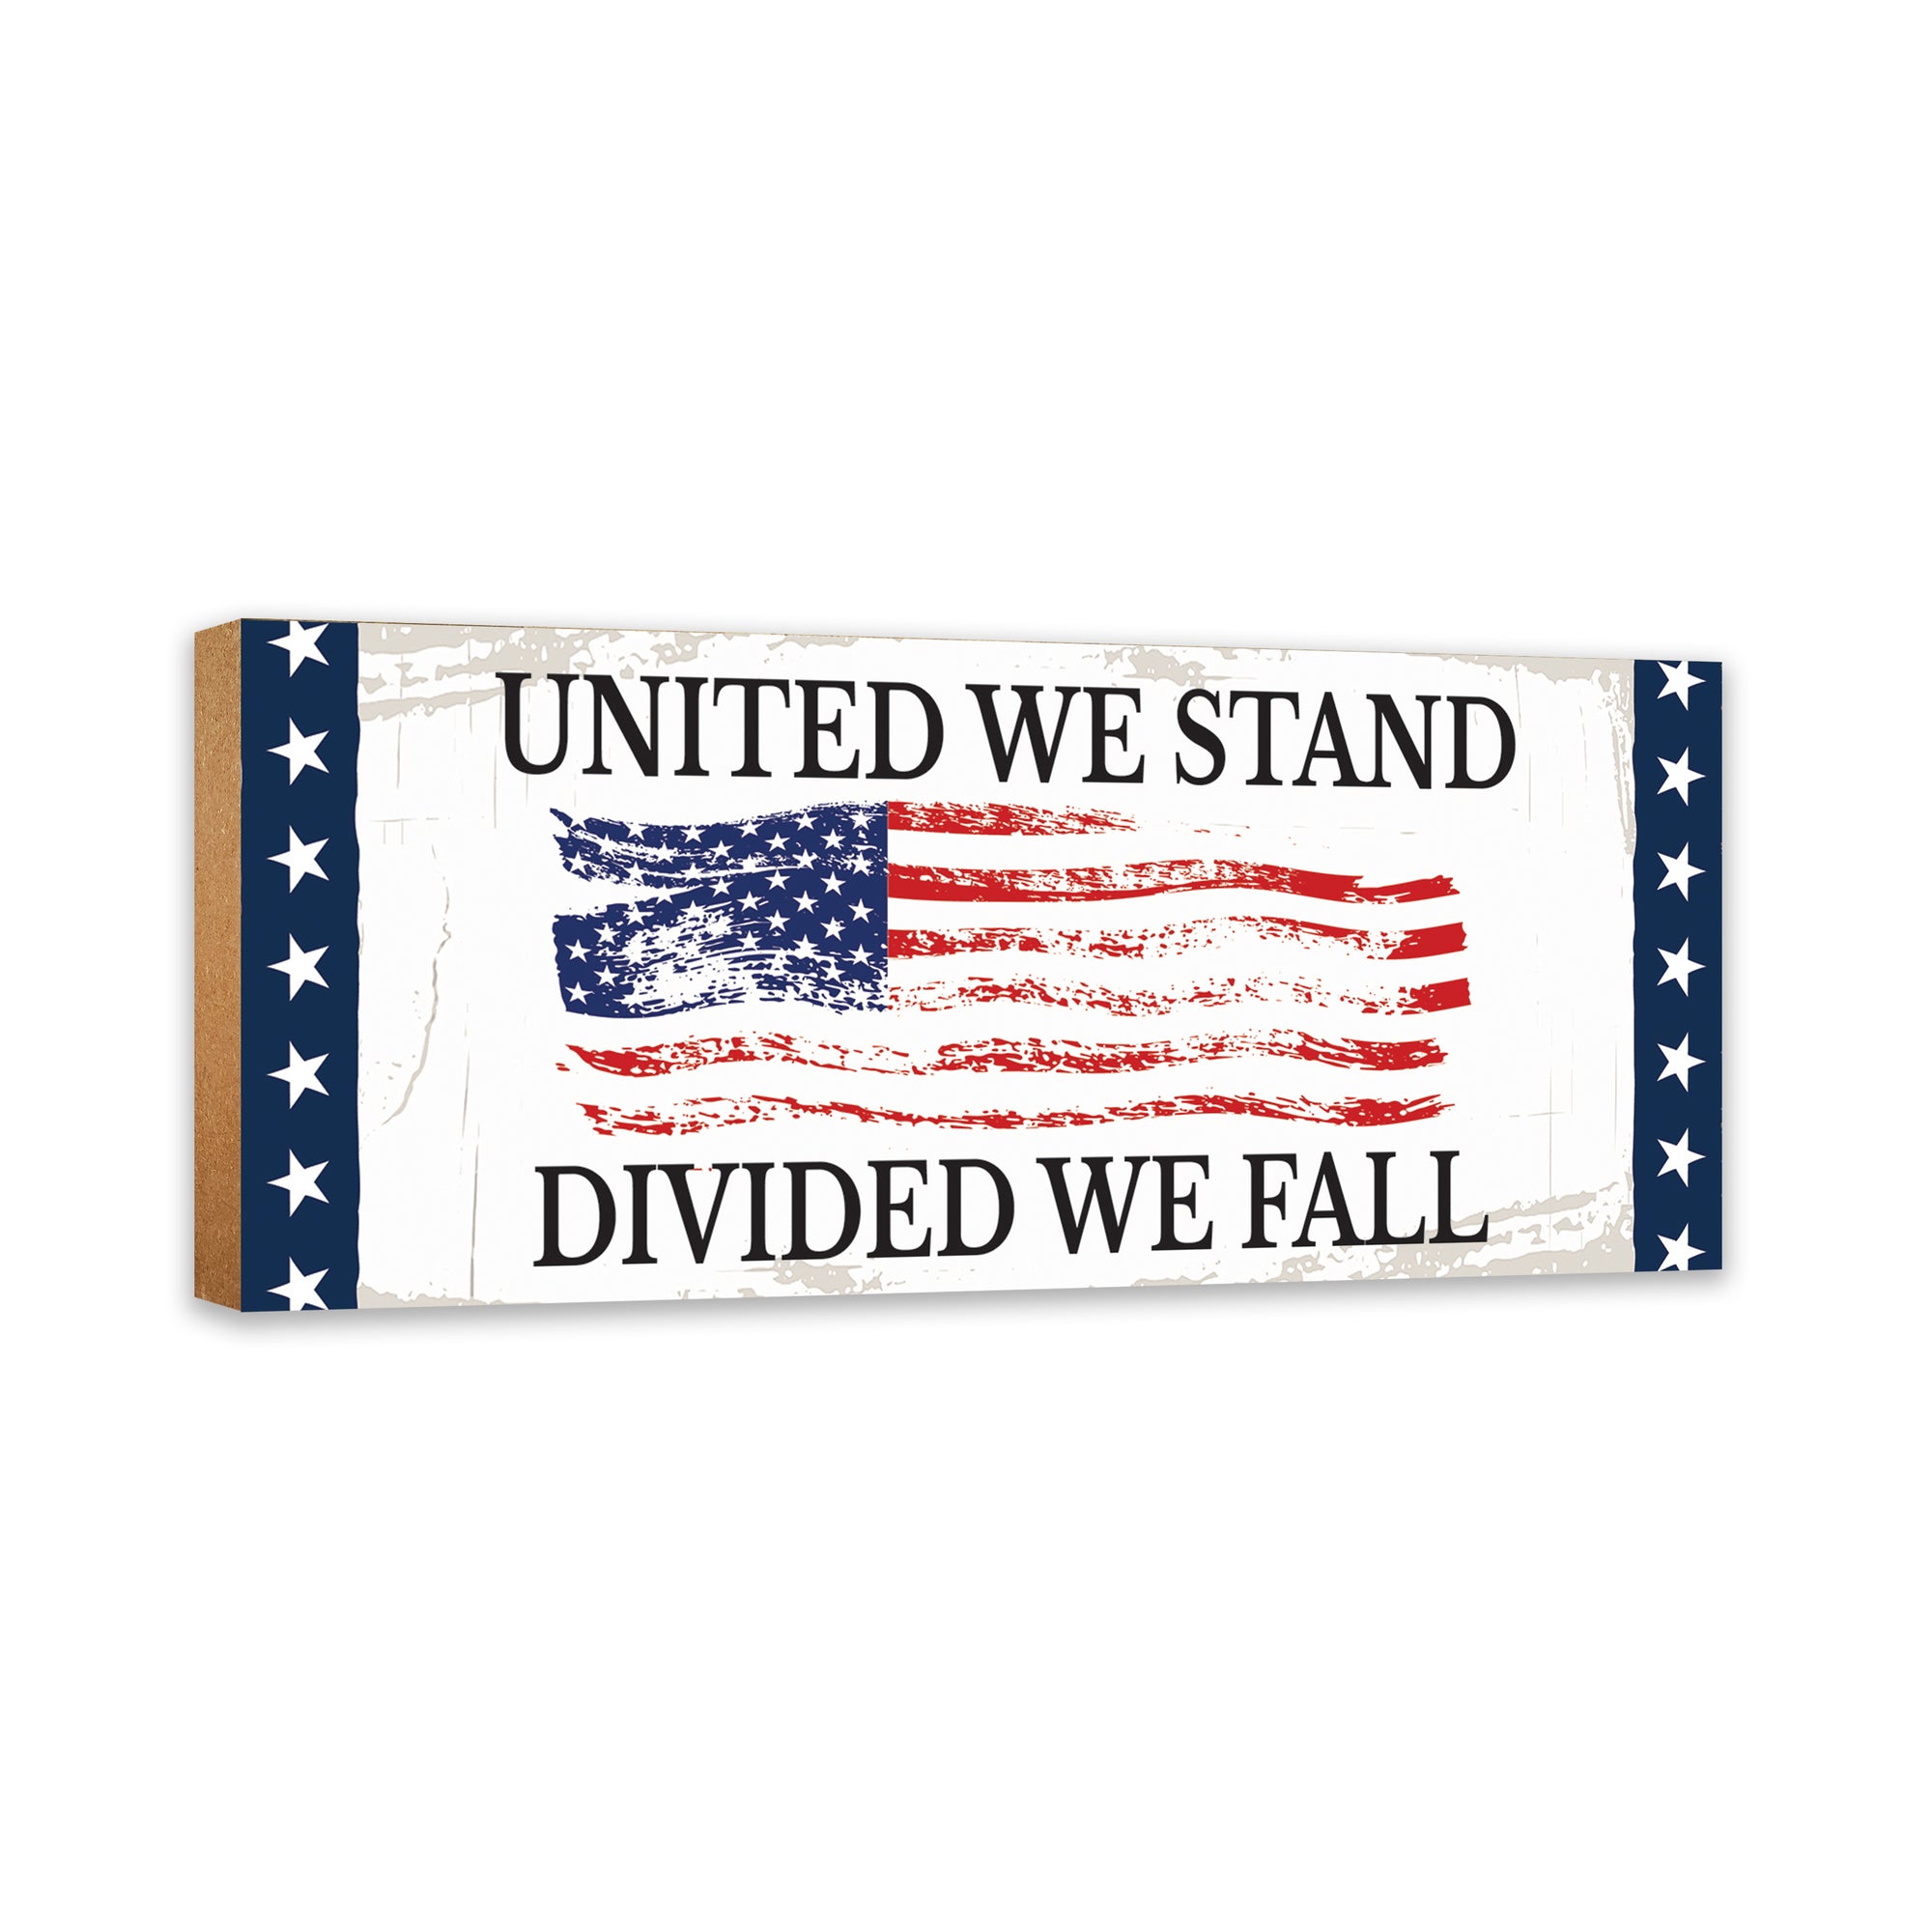 Modern Americana Tabletop Gift for loved ones